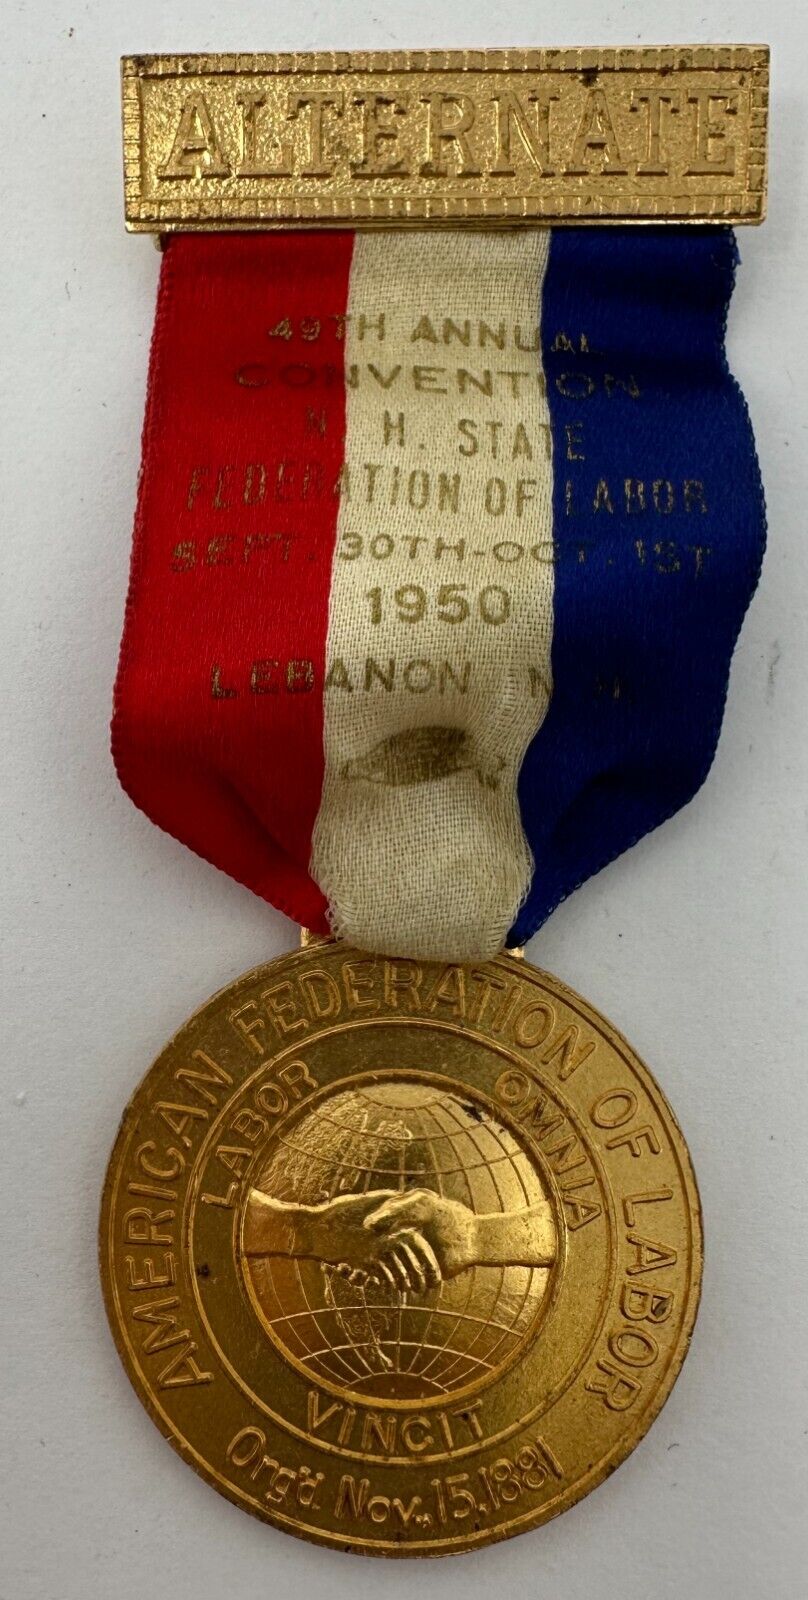 1950 American Federation Of Labor 49th Annual Convention Medal Ribbon